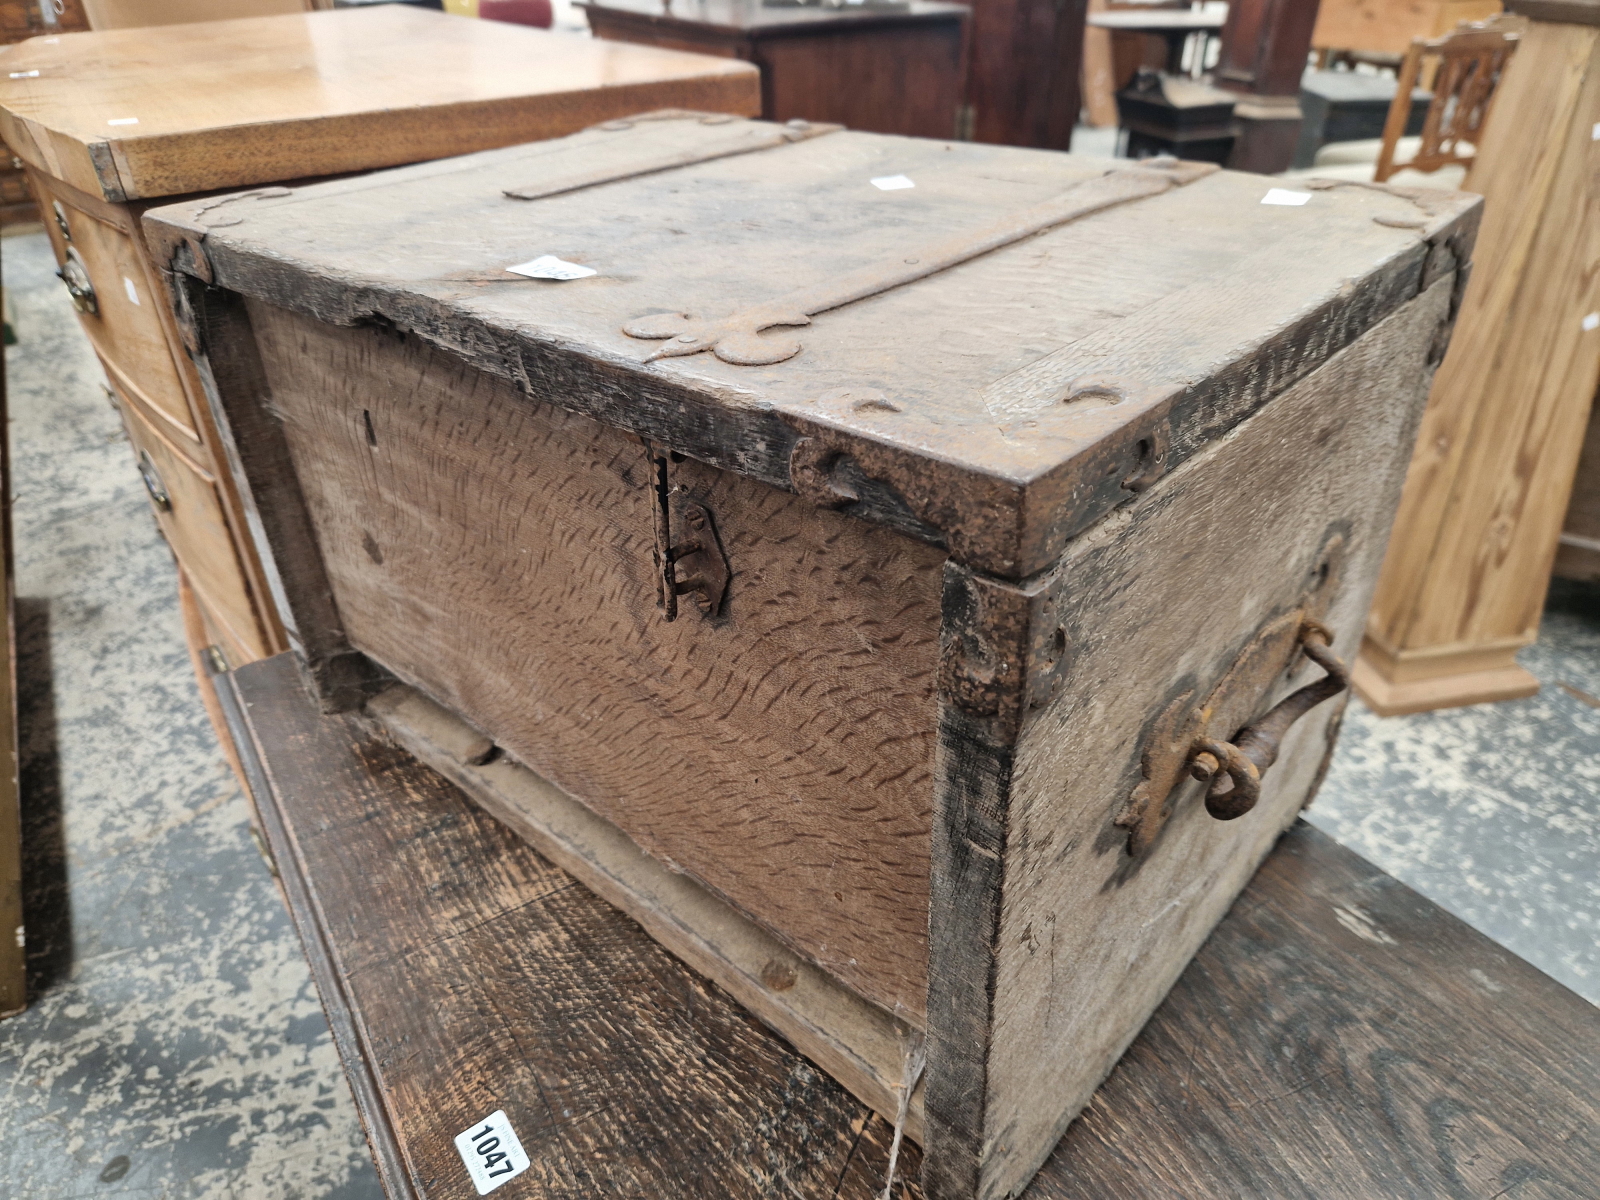 AN IRON BOUND TWO HANDLED OAK STRONG BOX BEARING THE DATE 1689 INSIDE THE HINGED LID